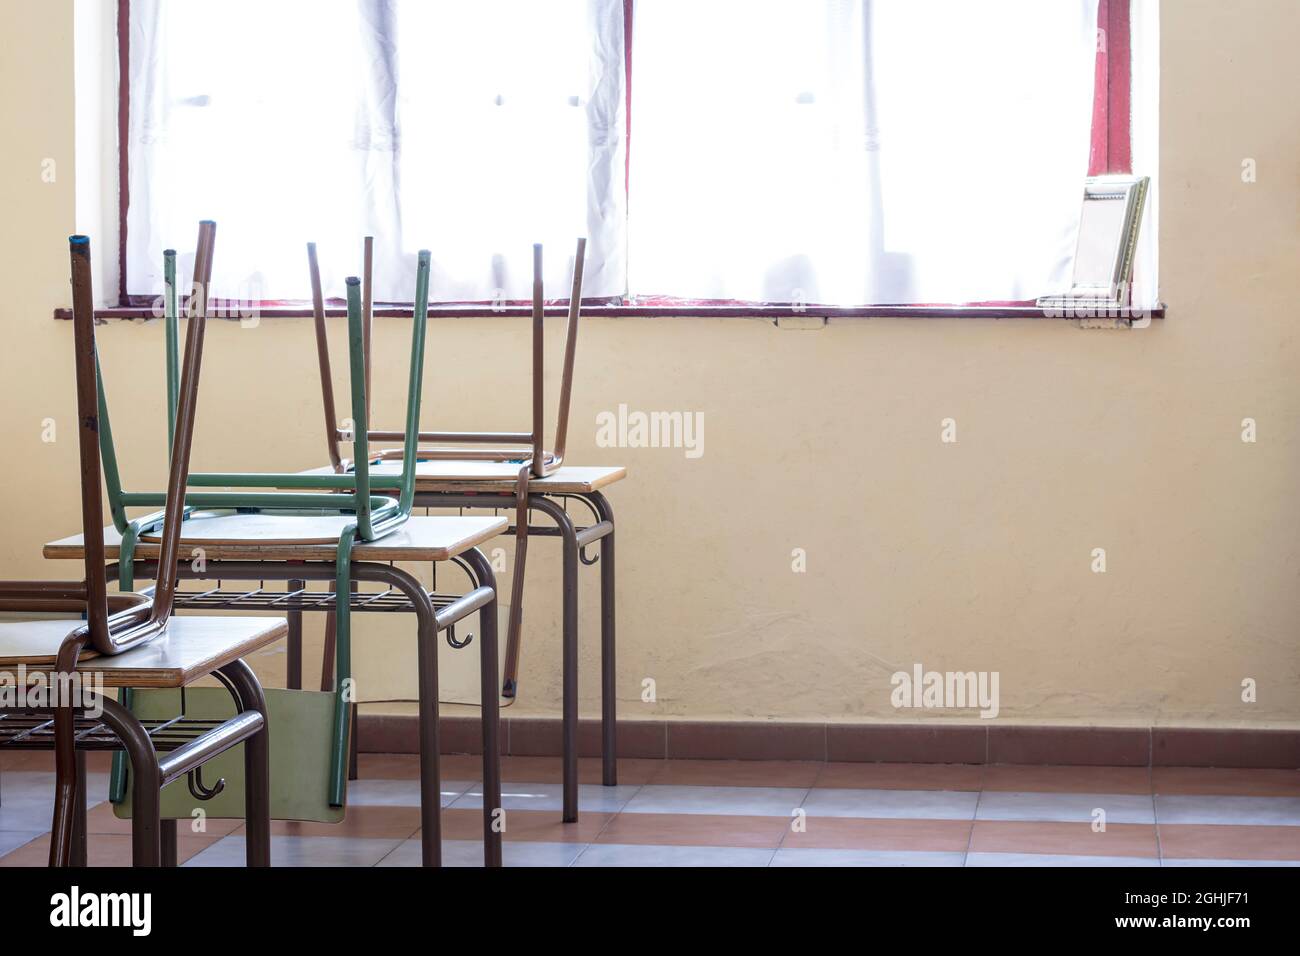 Infant school chairs on top of the tables.The photograph is taken in horizontal format. Stock Photo